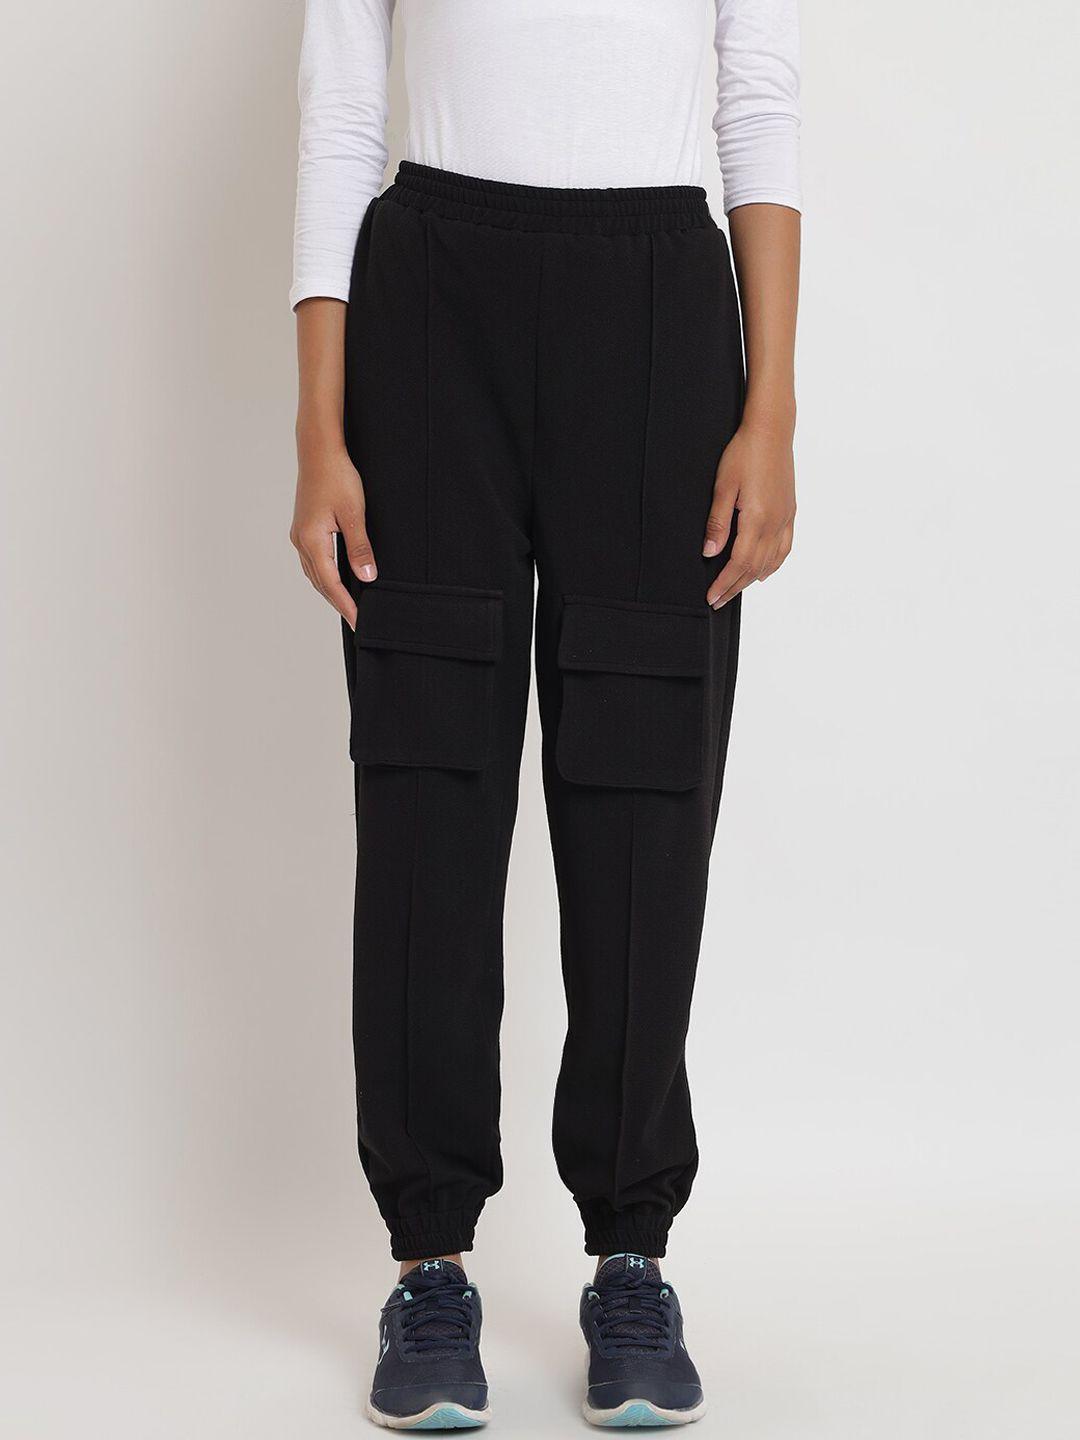 anaghakart women black solid relaxed-fit track pants